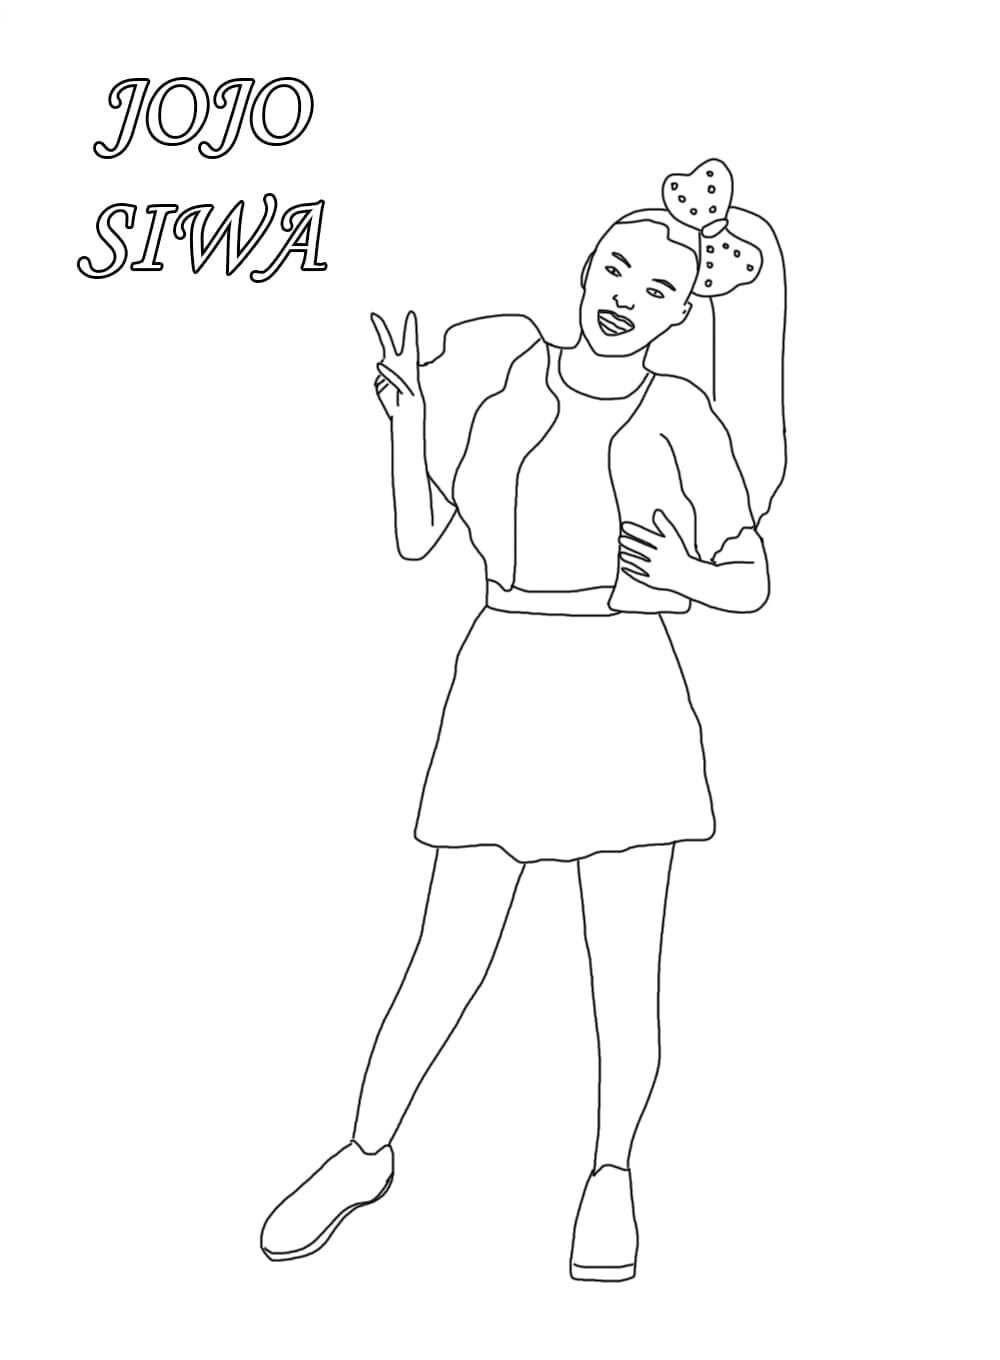 Jojo Siwa shows victory fingers Coloring Pages